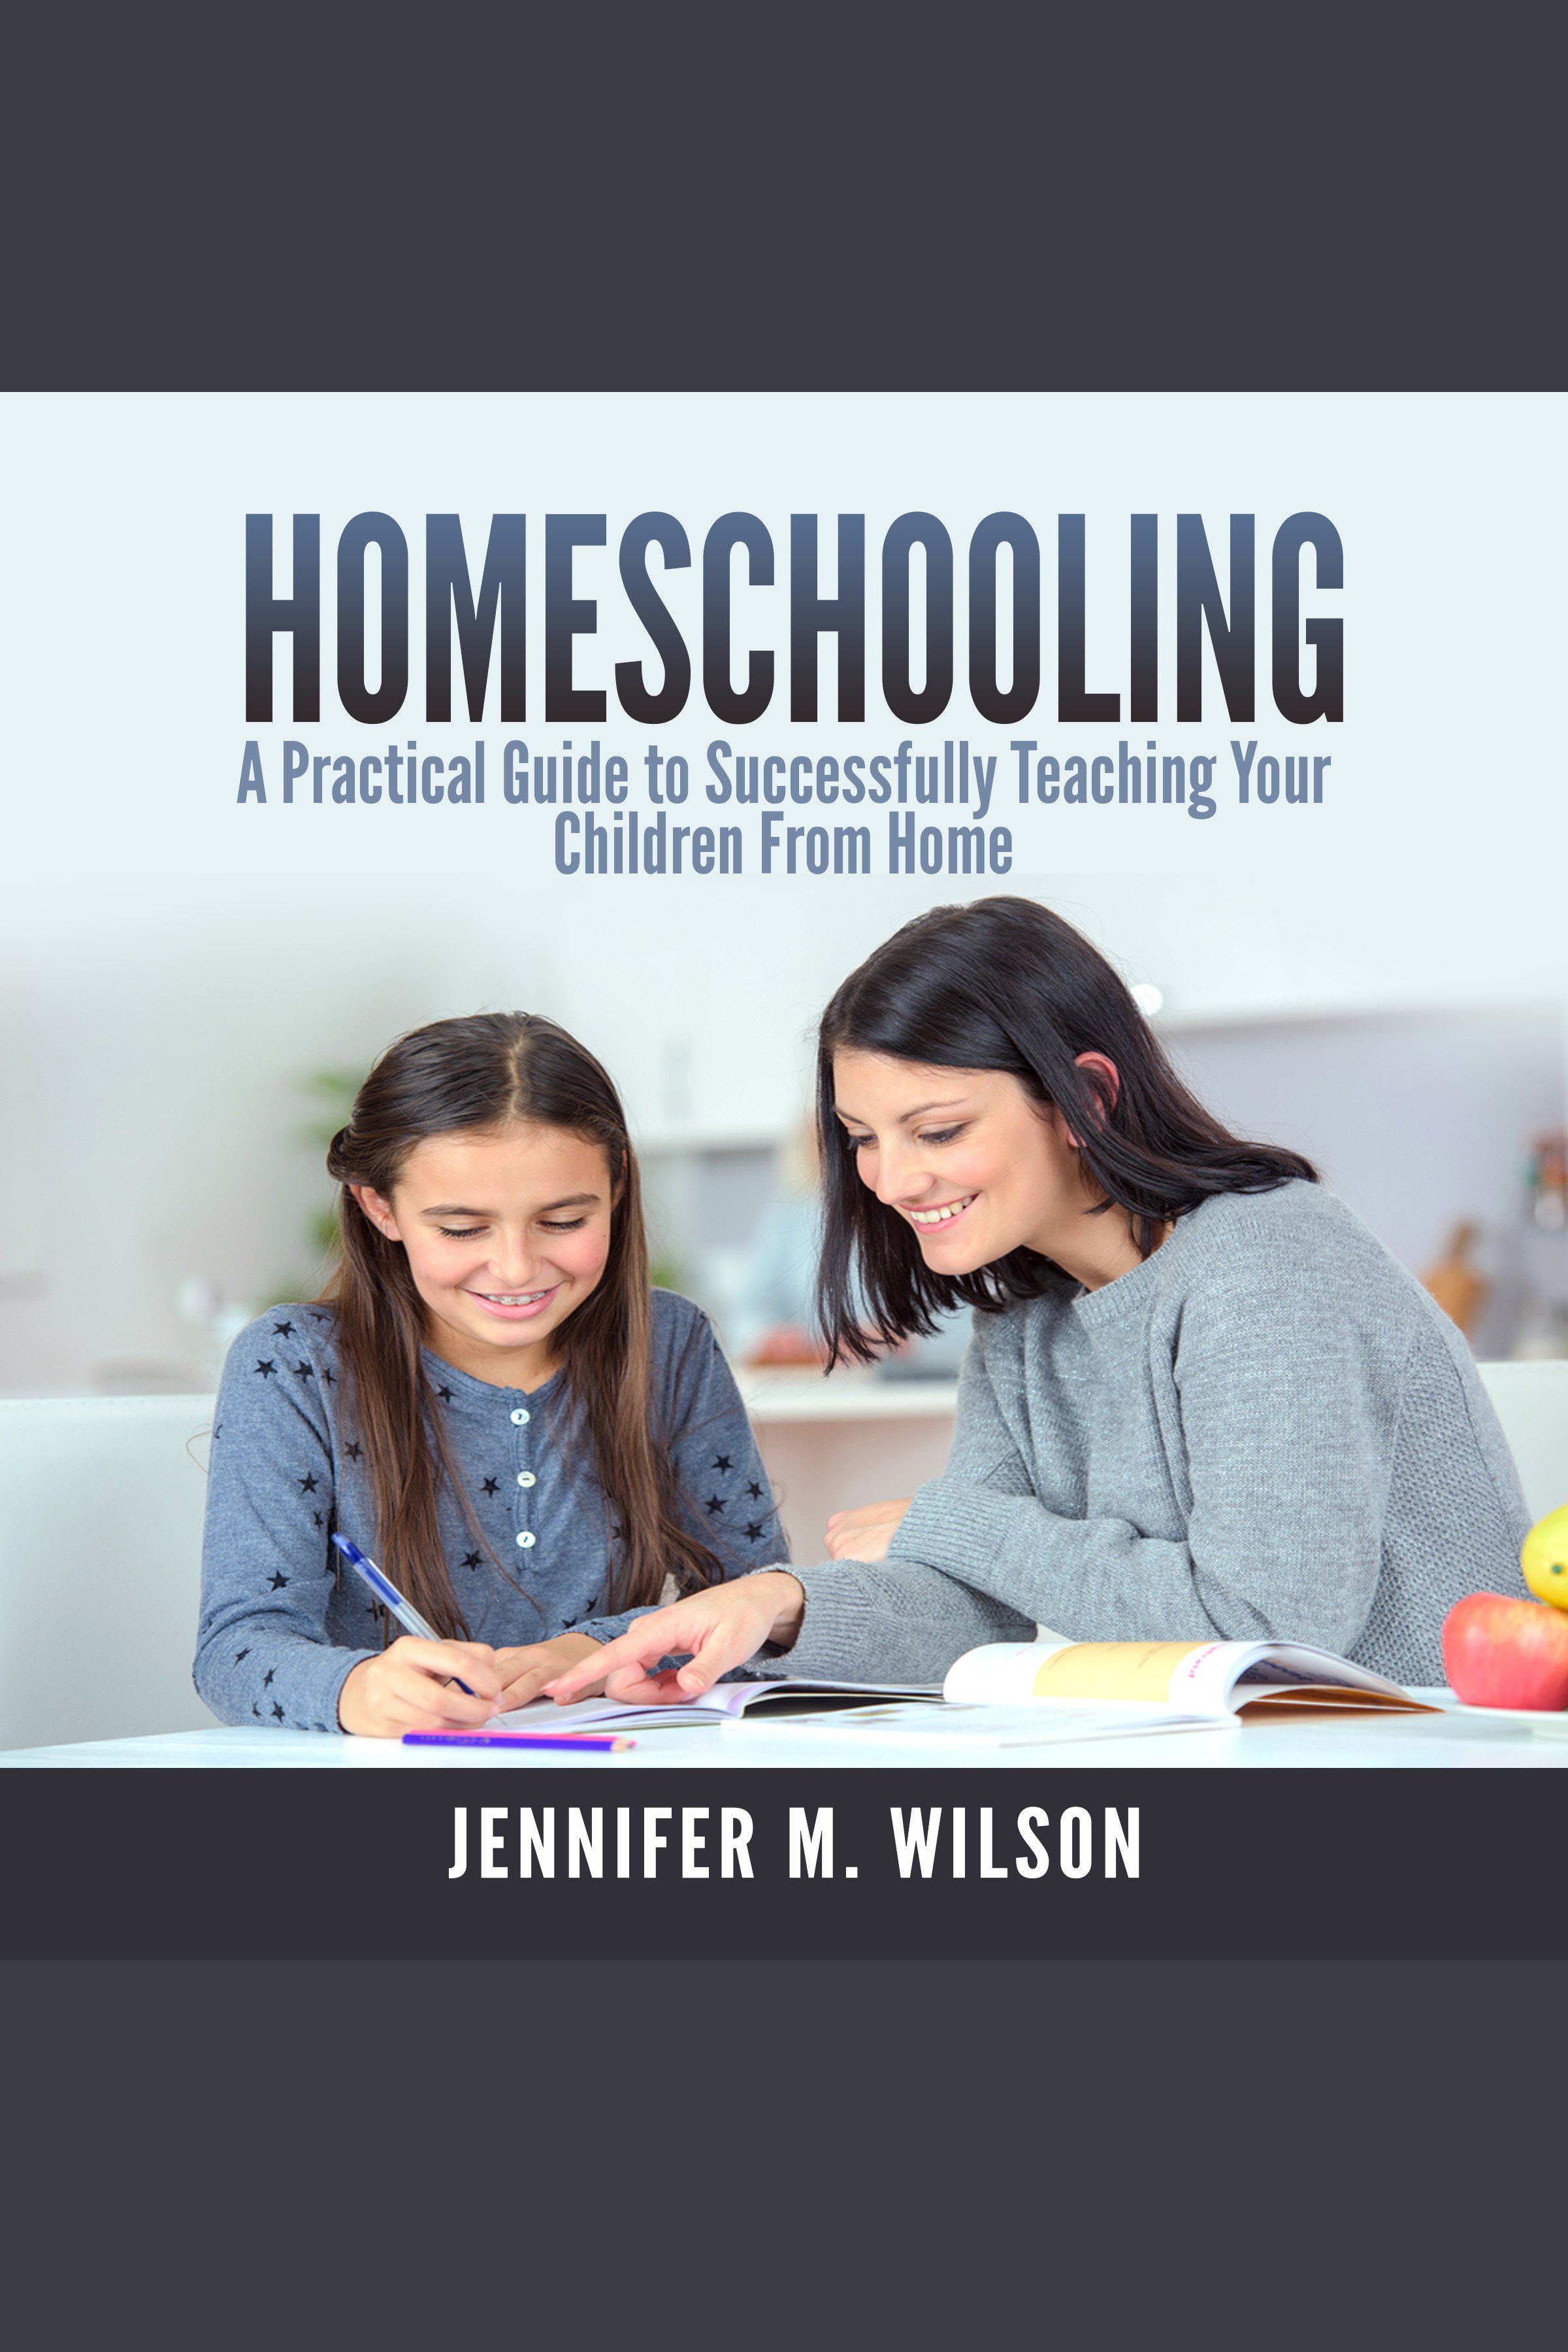 Homeschooling a practical guide to successfully teaching your children from home cover image